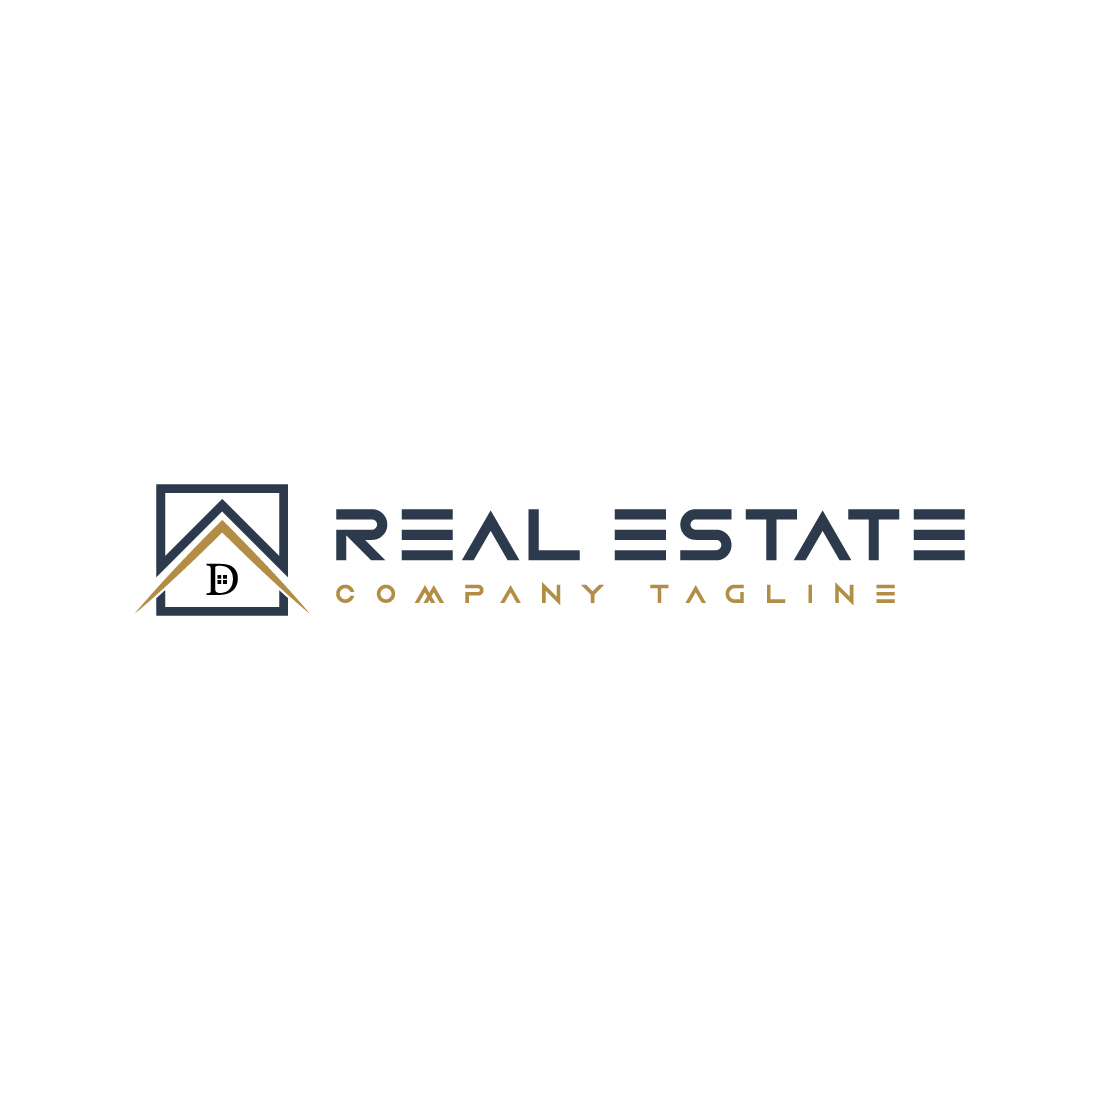 Real estate logo with golden, dark blue color and C cover image.